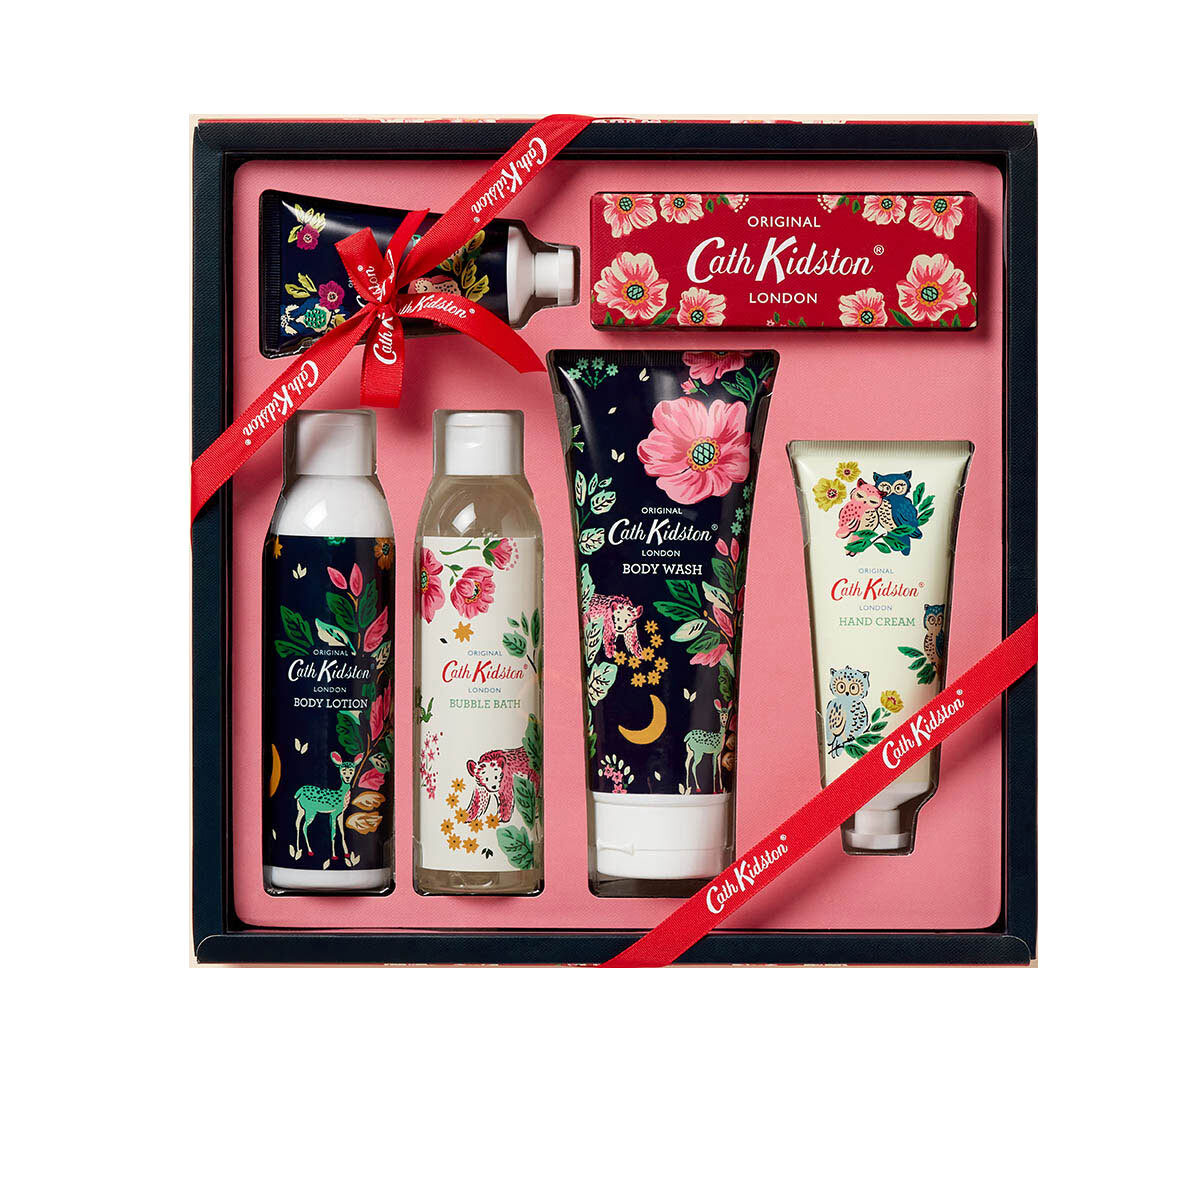 Cath Kidston Bath and Body Collection Gift Set in Magical Woodland Design in Blue